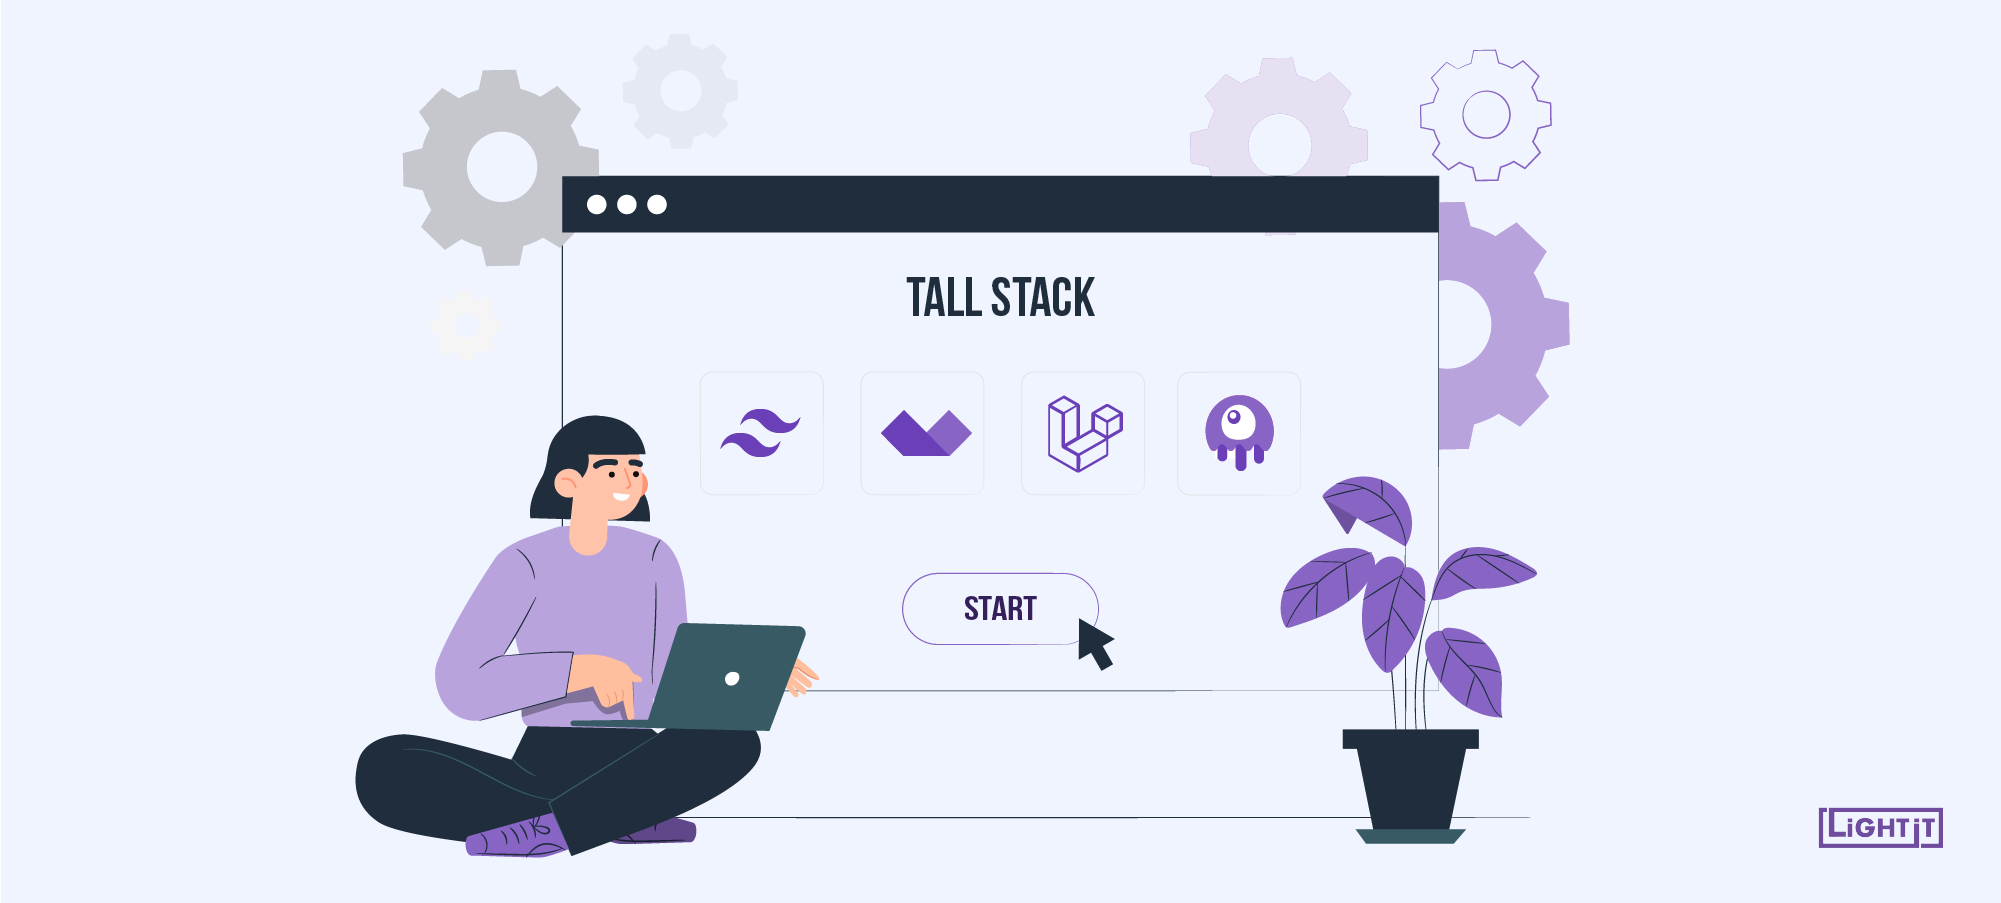 How to Build a Job Board With the TALL Stack - Demo [AlpineJS & Livewire]